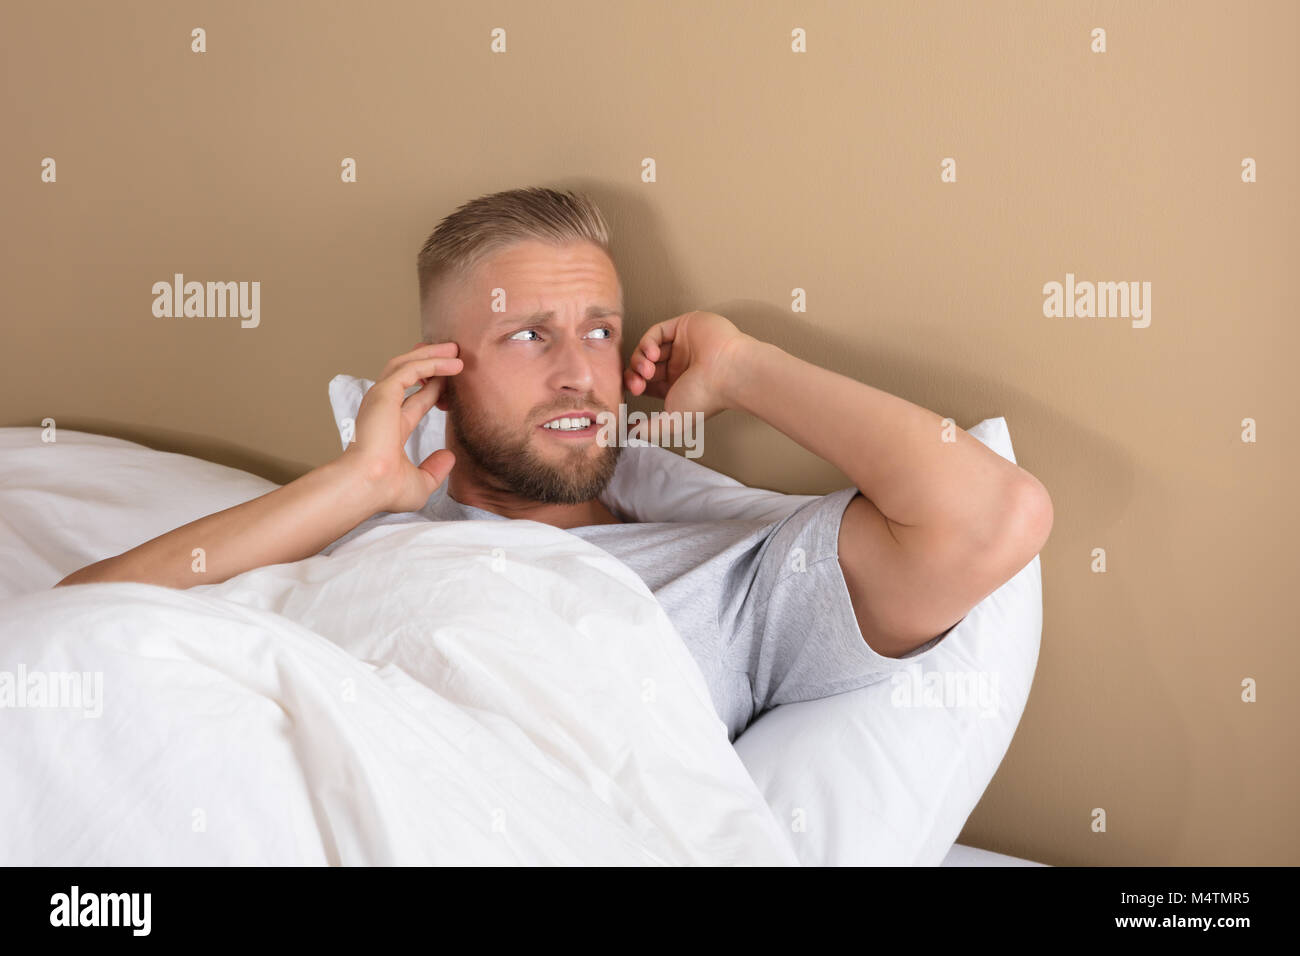 Troubled Young Man Lying On Bed Covering His Ears To Avoid Noise Stock Photo